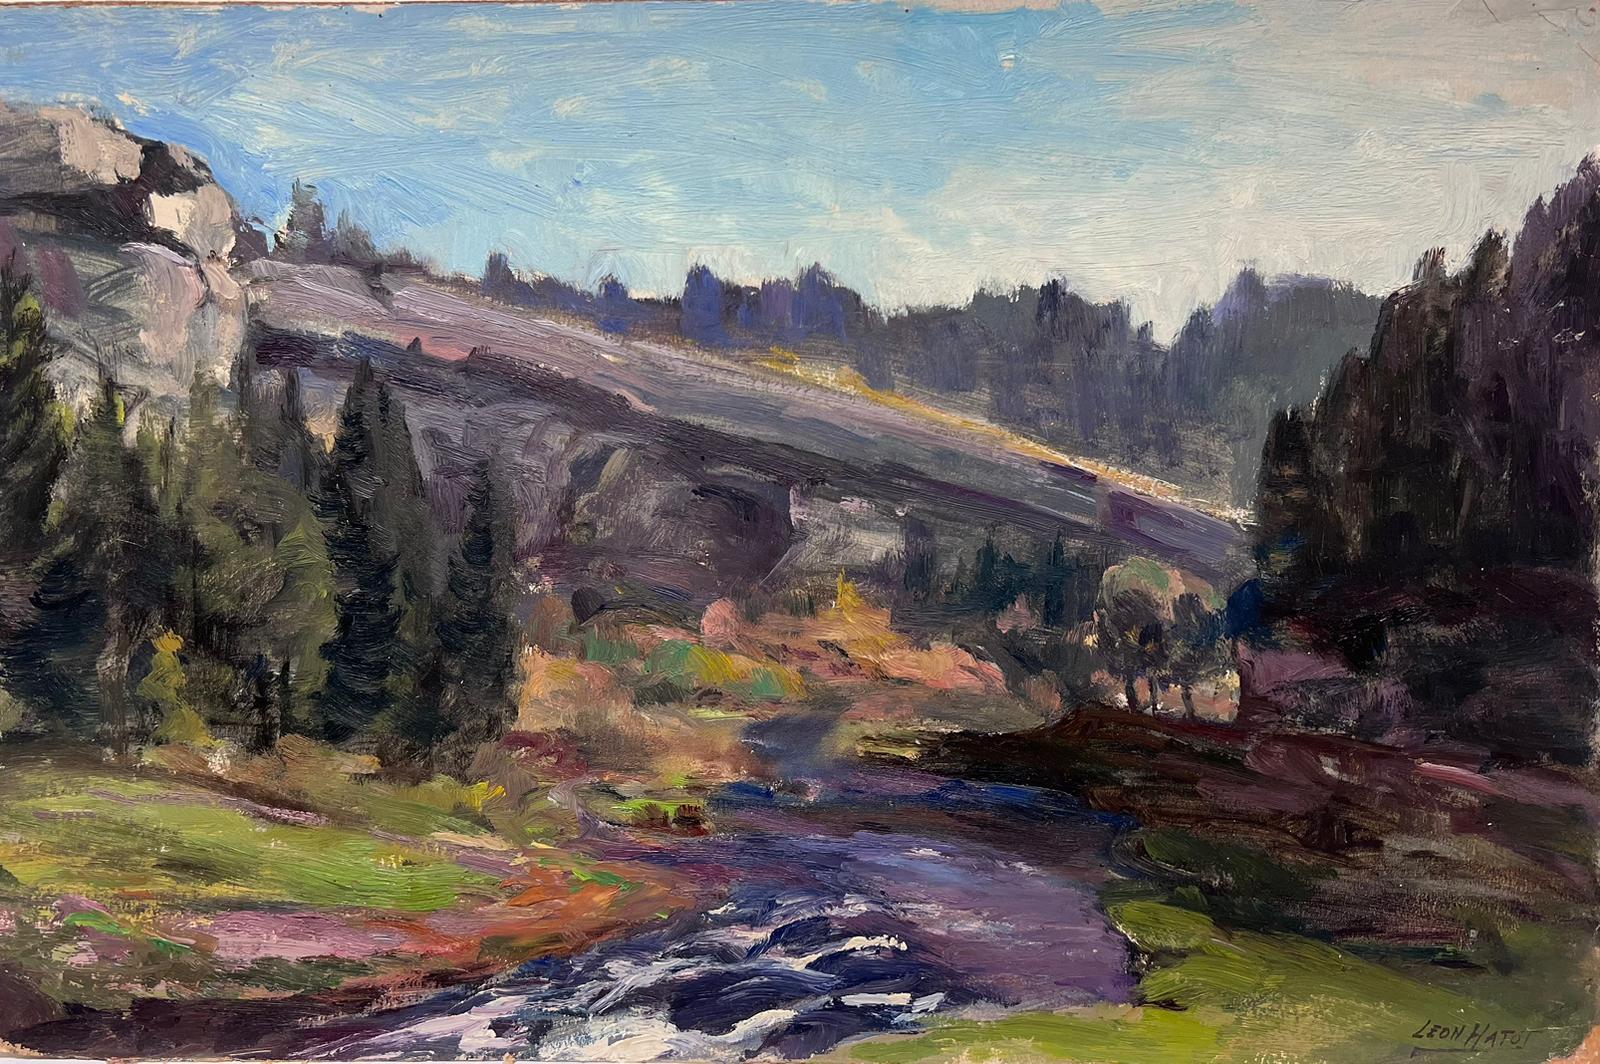 Leon Hatot Landscape Painting - Vintage French Oil Painting Rocky Mountain Landscape With Purple Flowing River